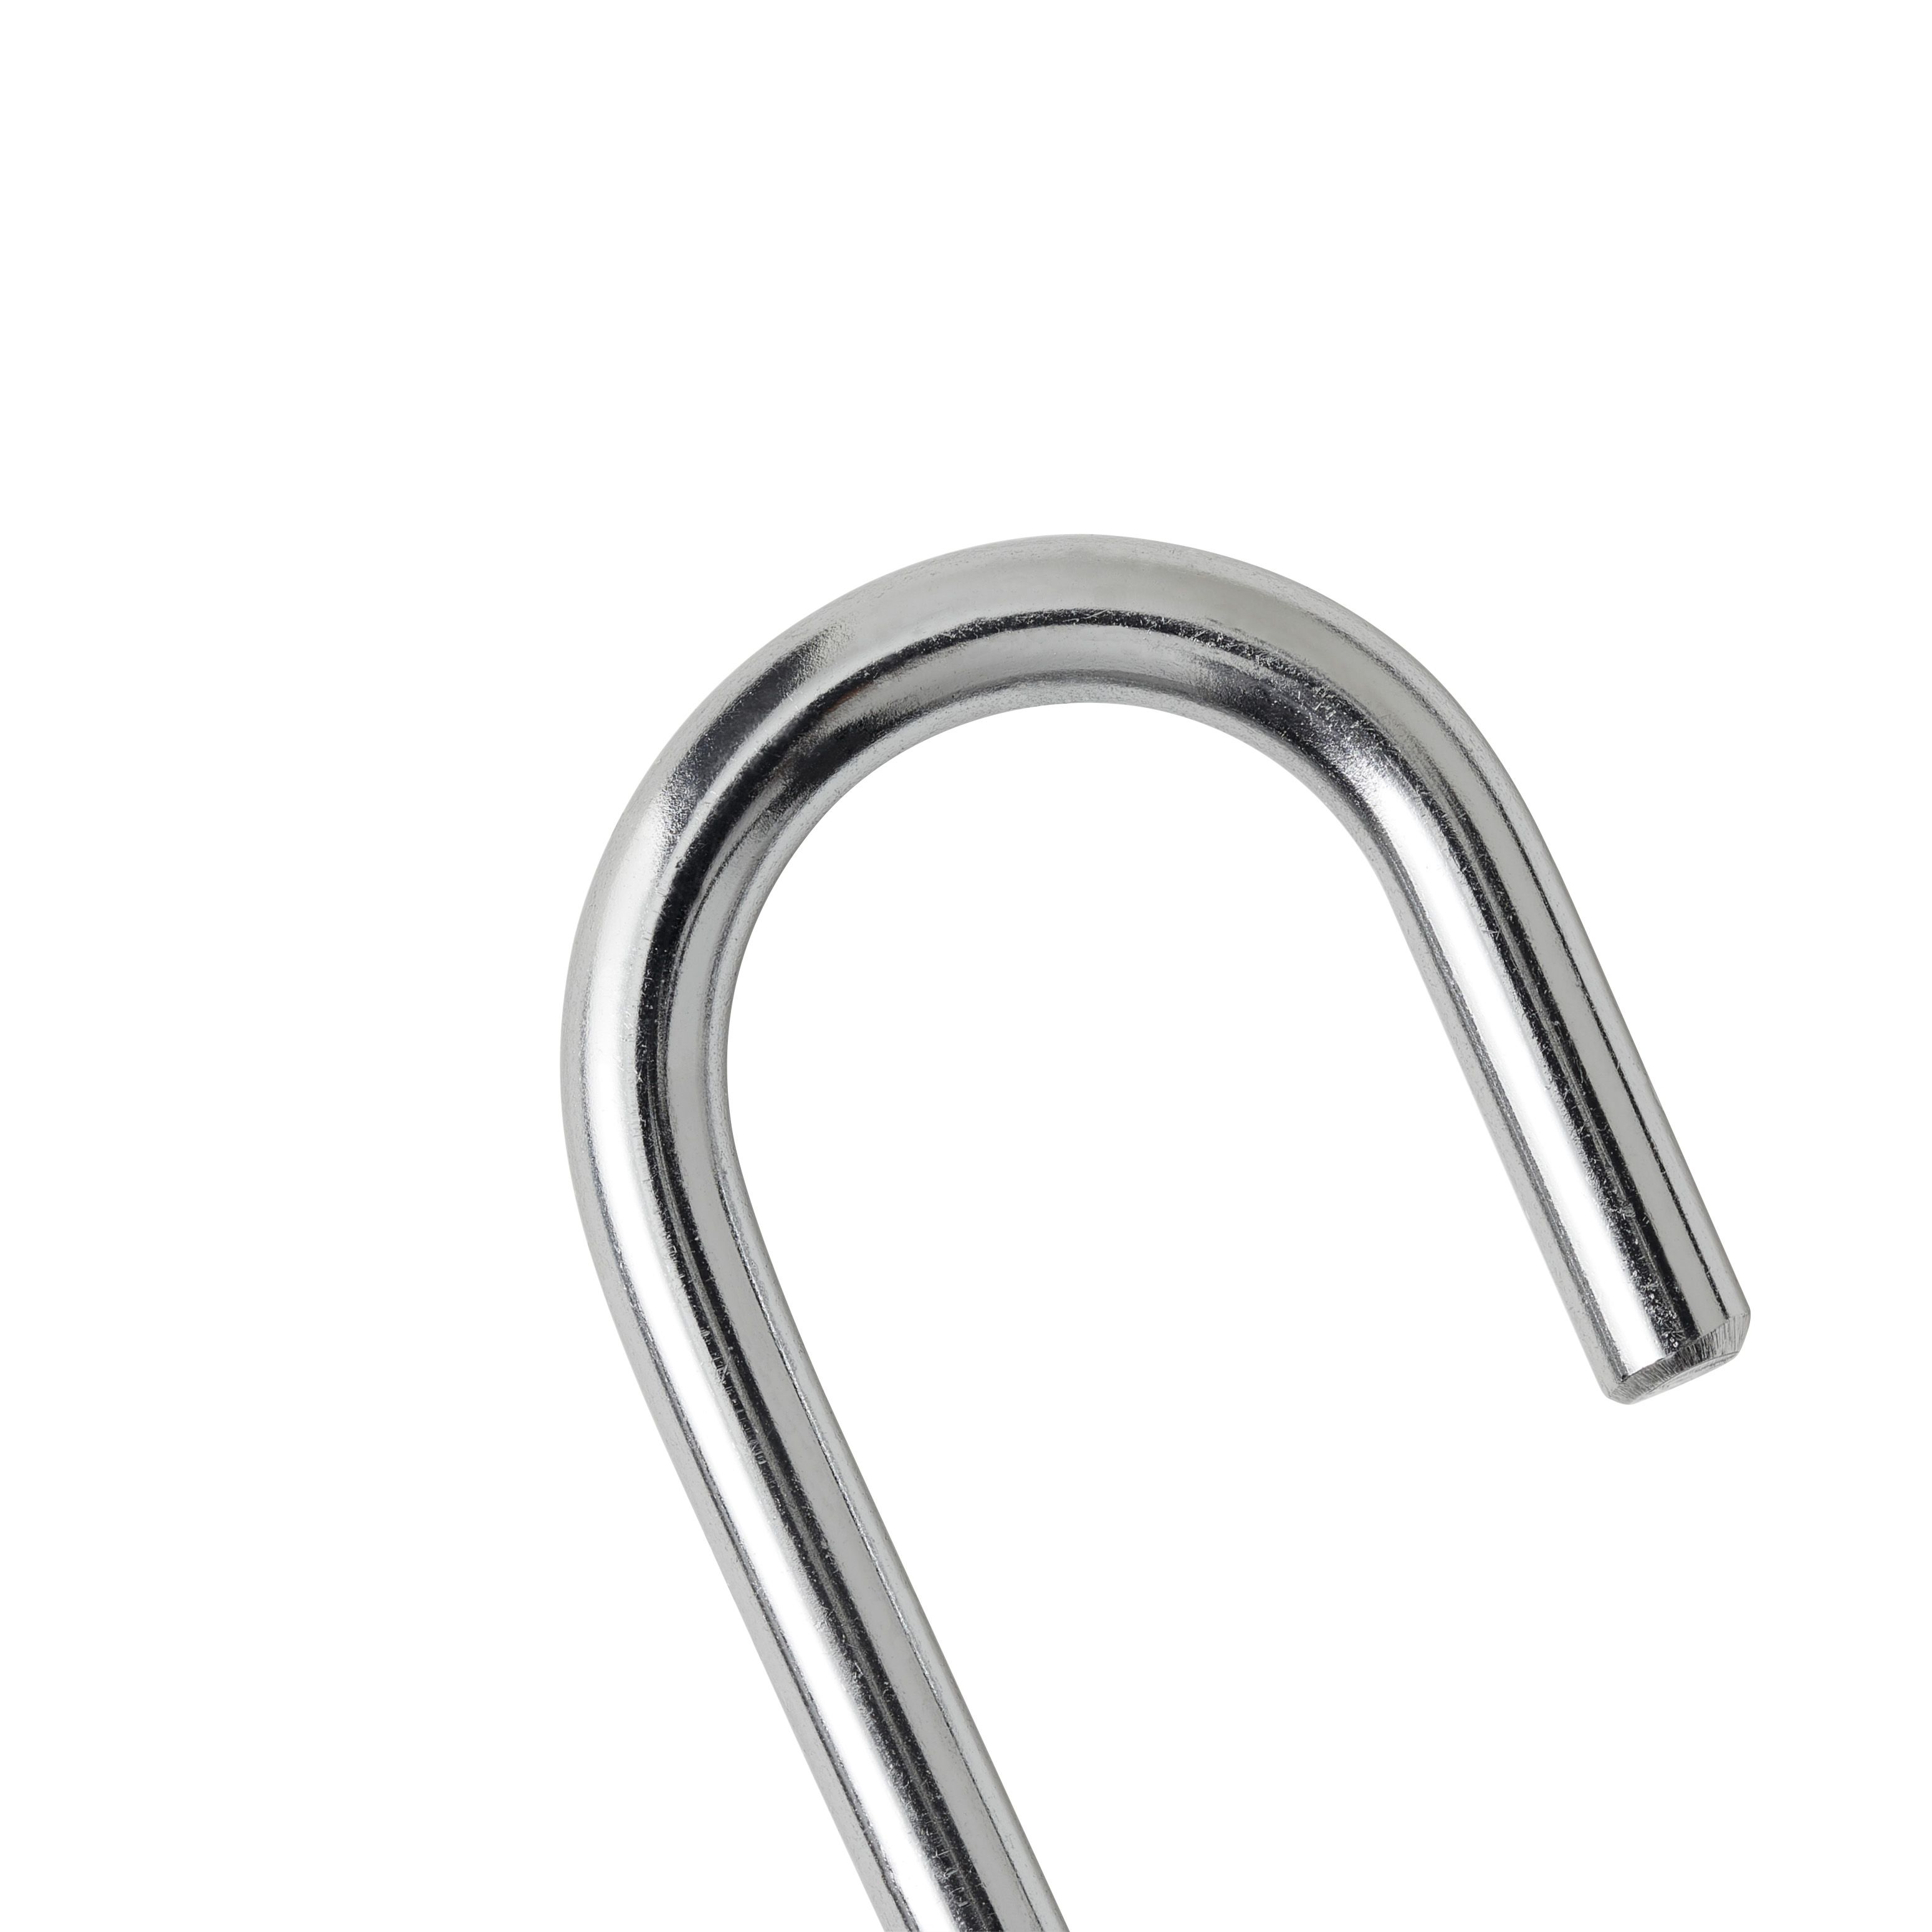 GoodHome Datil Chrome-plated Steel S-shaped Single Storage hook, Pack of 6